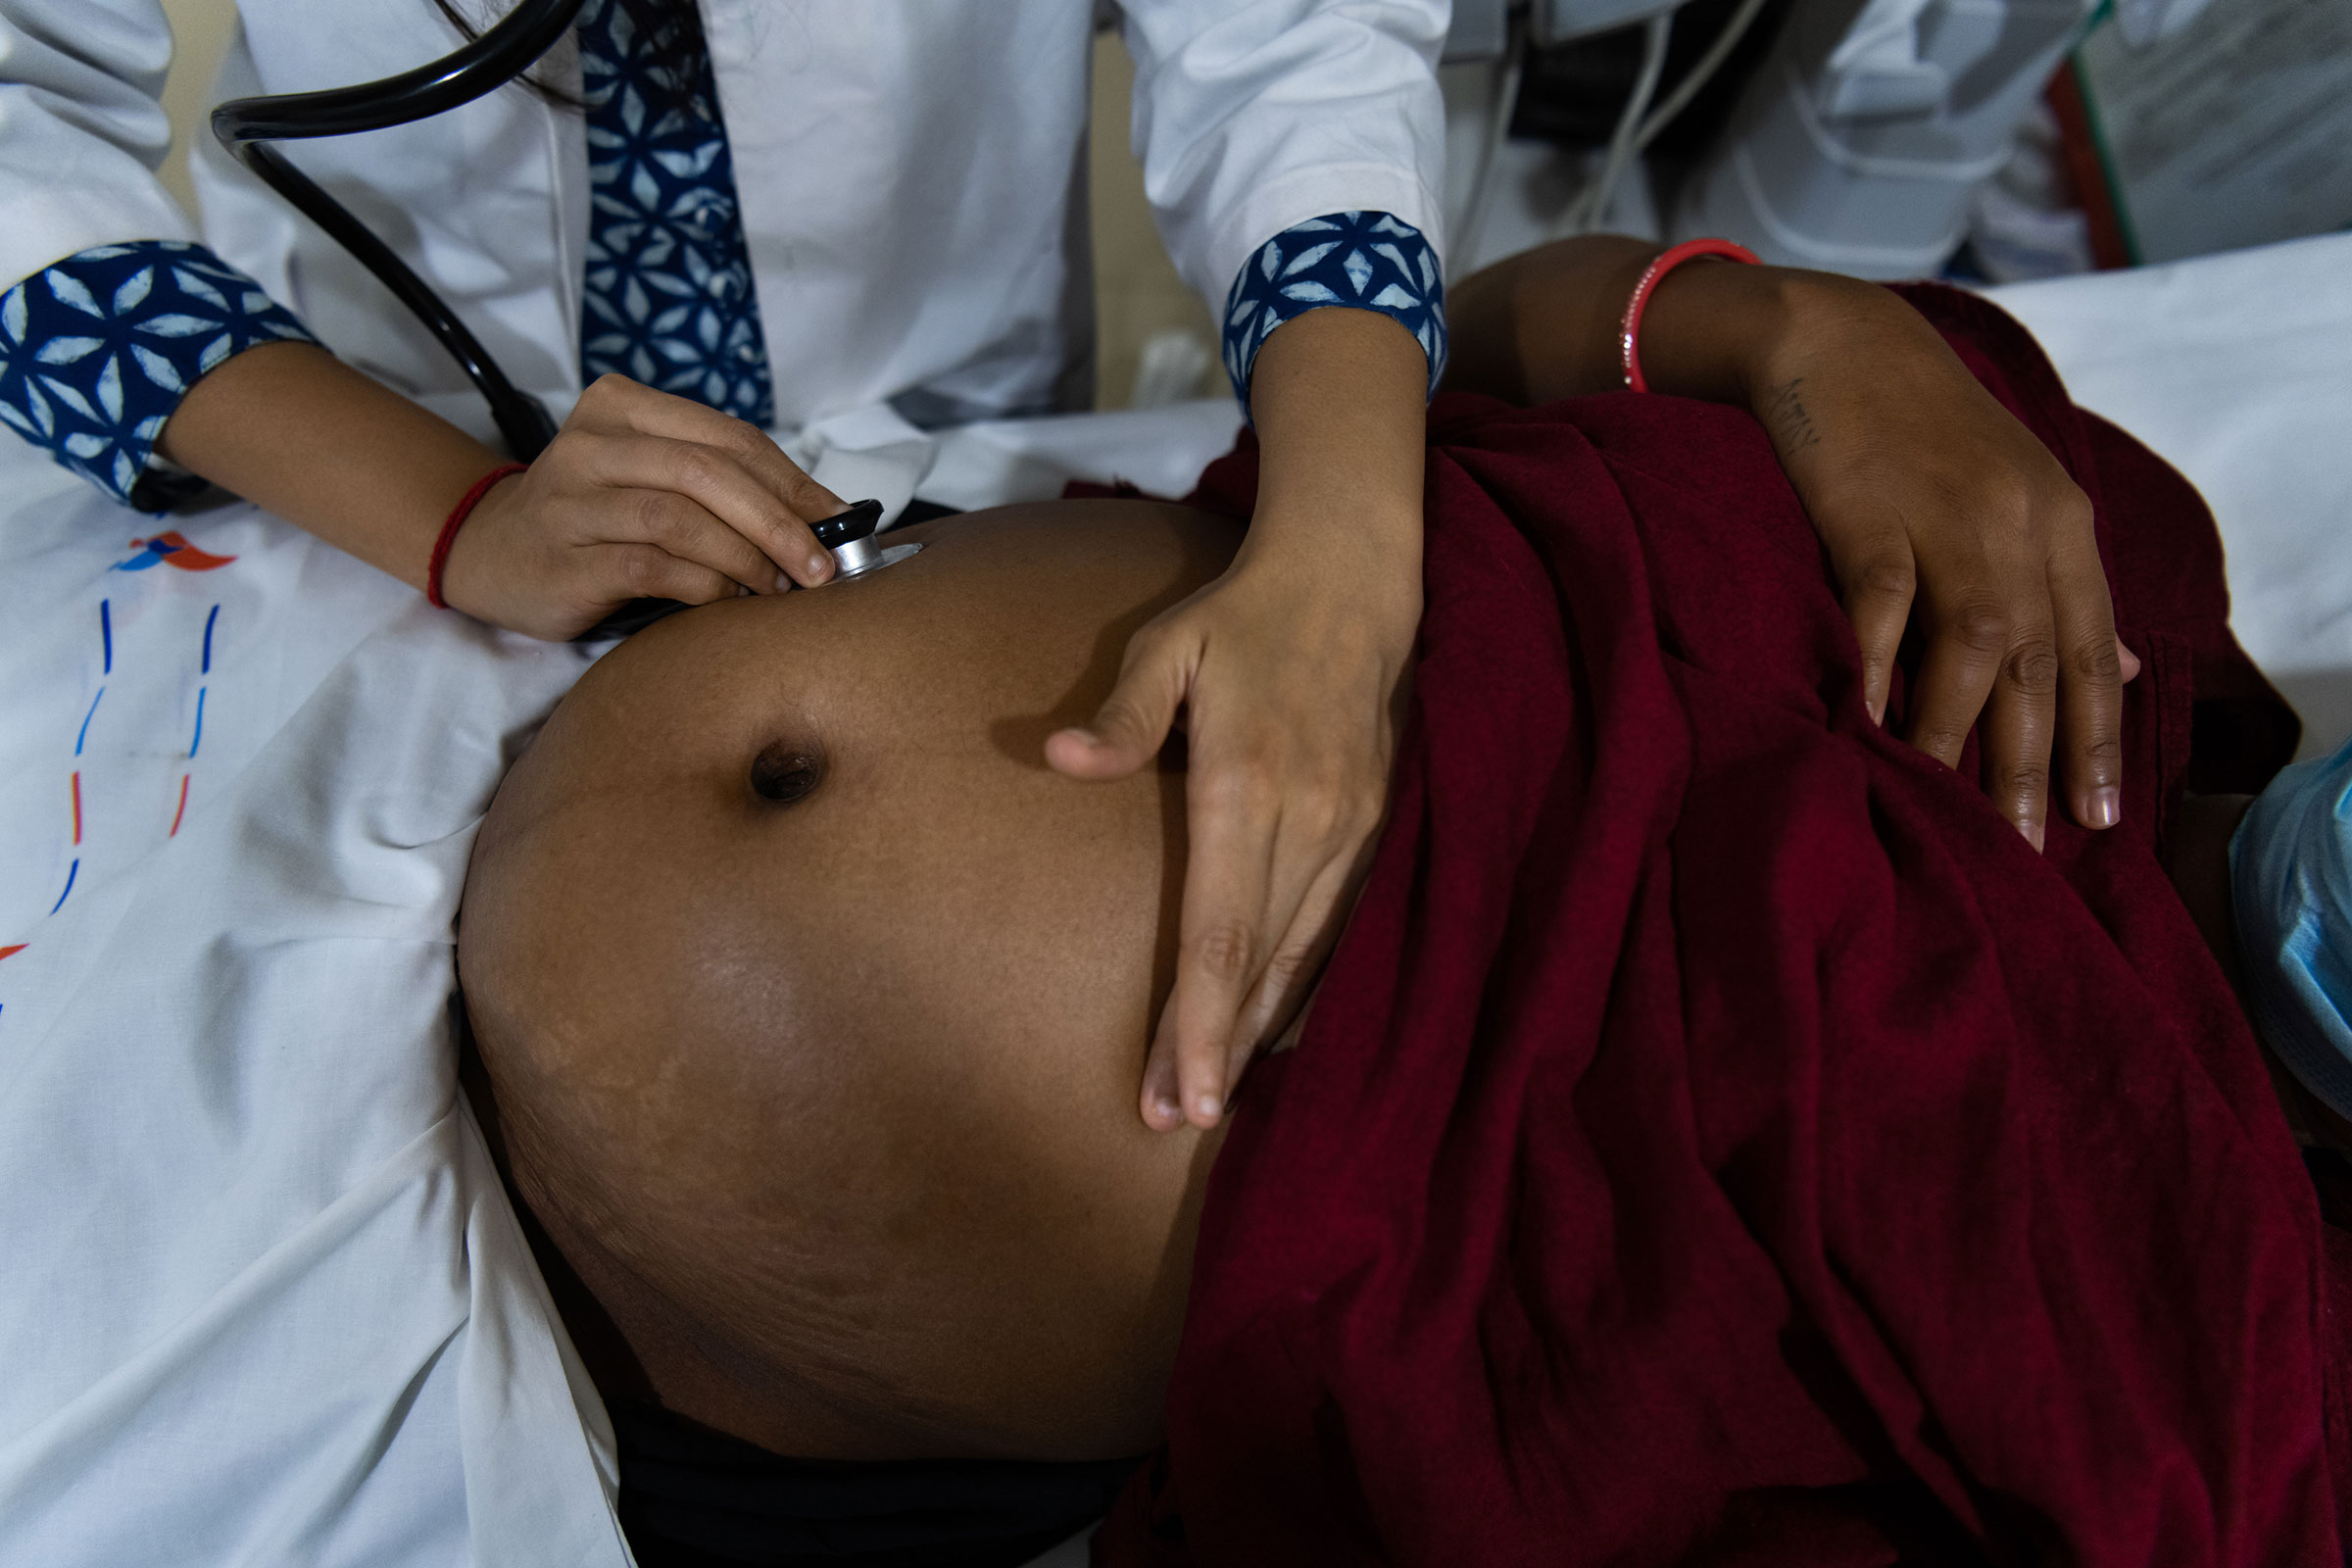 Kajal Vasava, 24, undergoes a checkup at Akanksha, seven months into her pregnancy. A first-time surrogate, Vasava has brought her 3-year-old daughter to stay with her at the clinic for the entire duration of her pregnancy. She turned to surrogacy after financial difficulties during India's COVID-19 lockdown. (Smita Sharma for TIME)